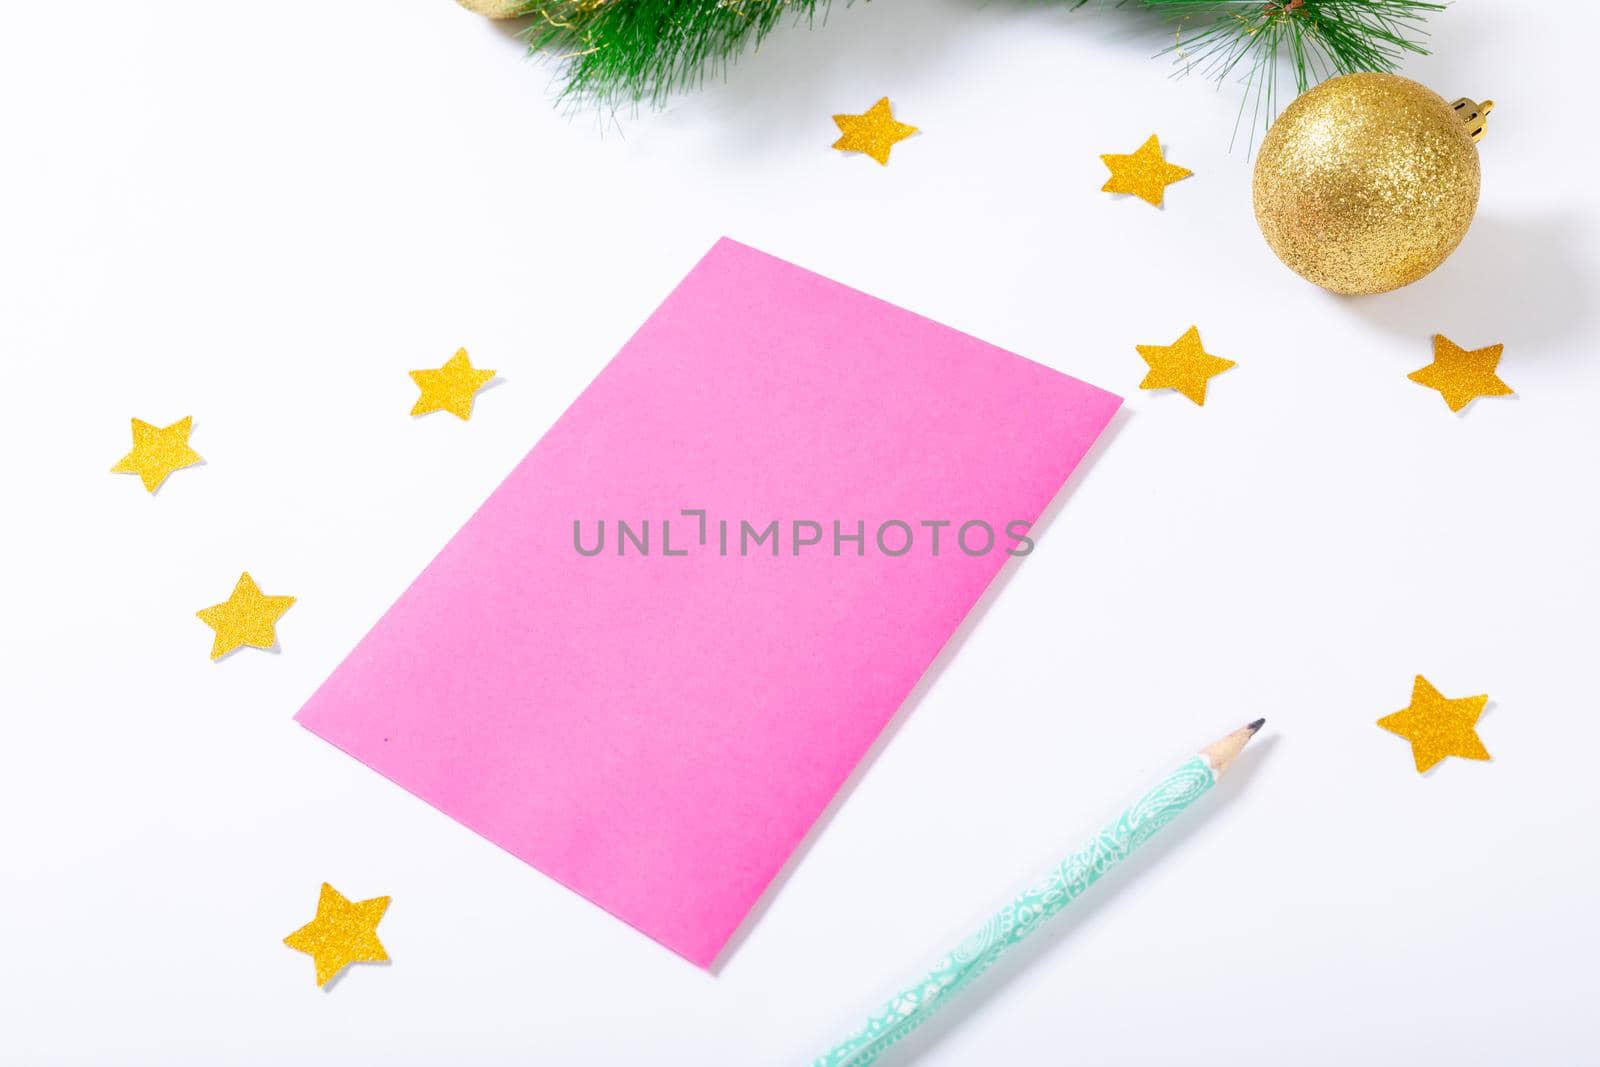 Composition of pink card with copy space, stars, pencil and bauble on white background by Wavebreakmedia